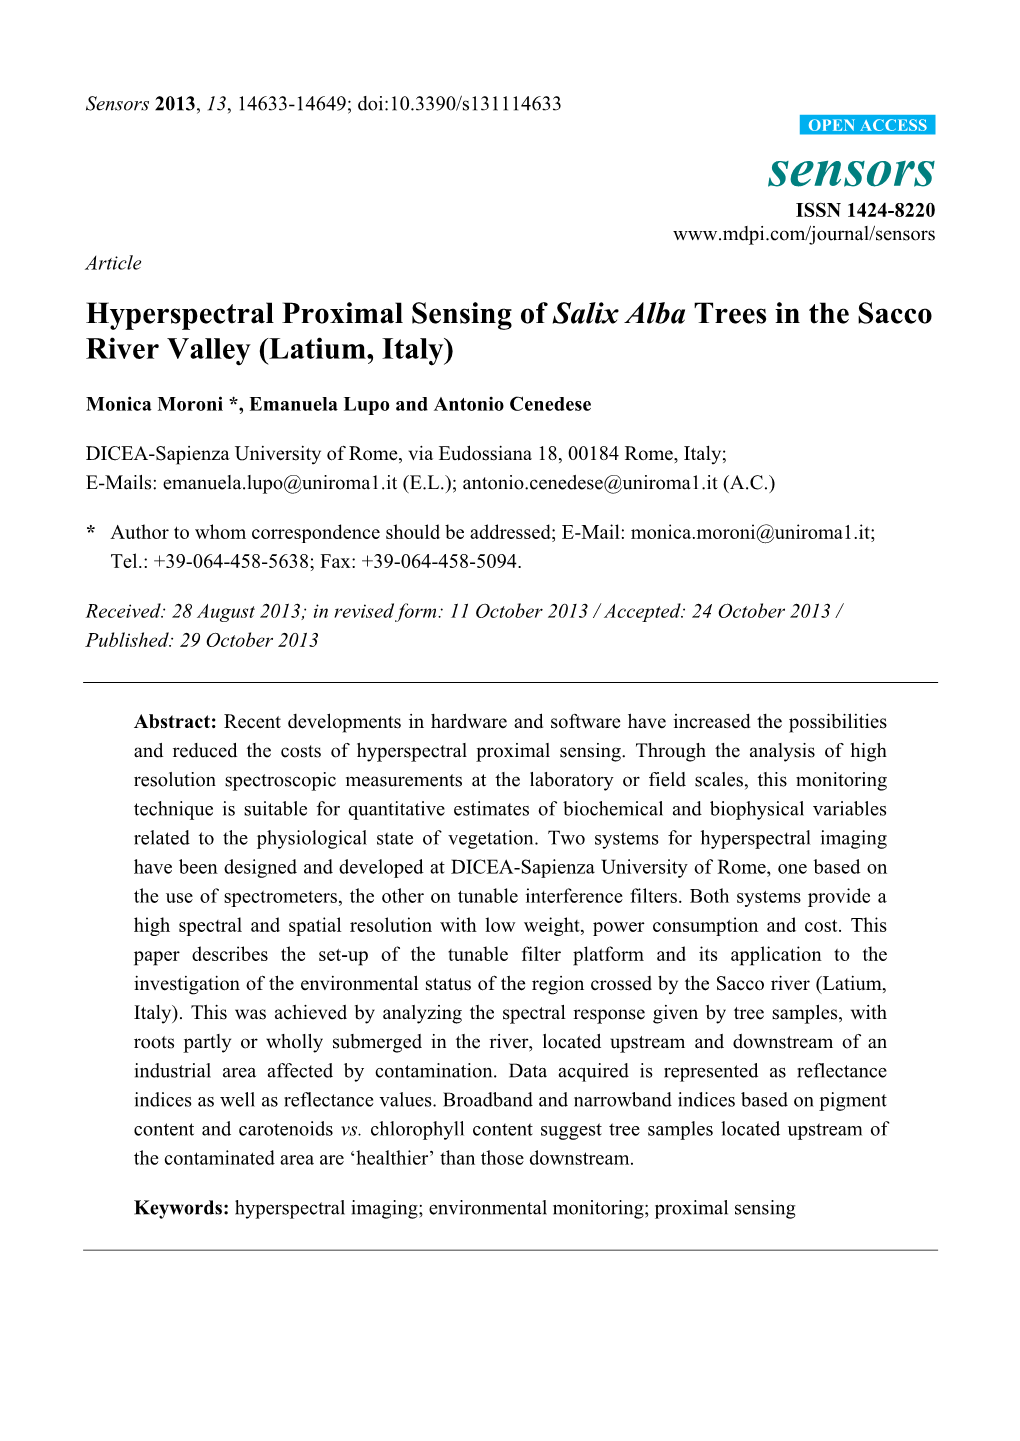 Hyperspectral Proximal Sensing of Salix Alba Trees in the Sacco River Valley (Latium, Italy)